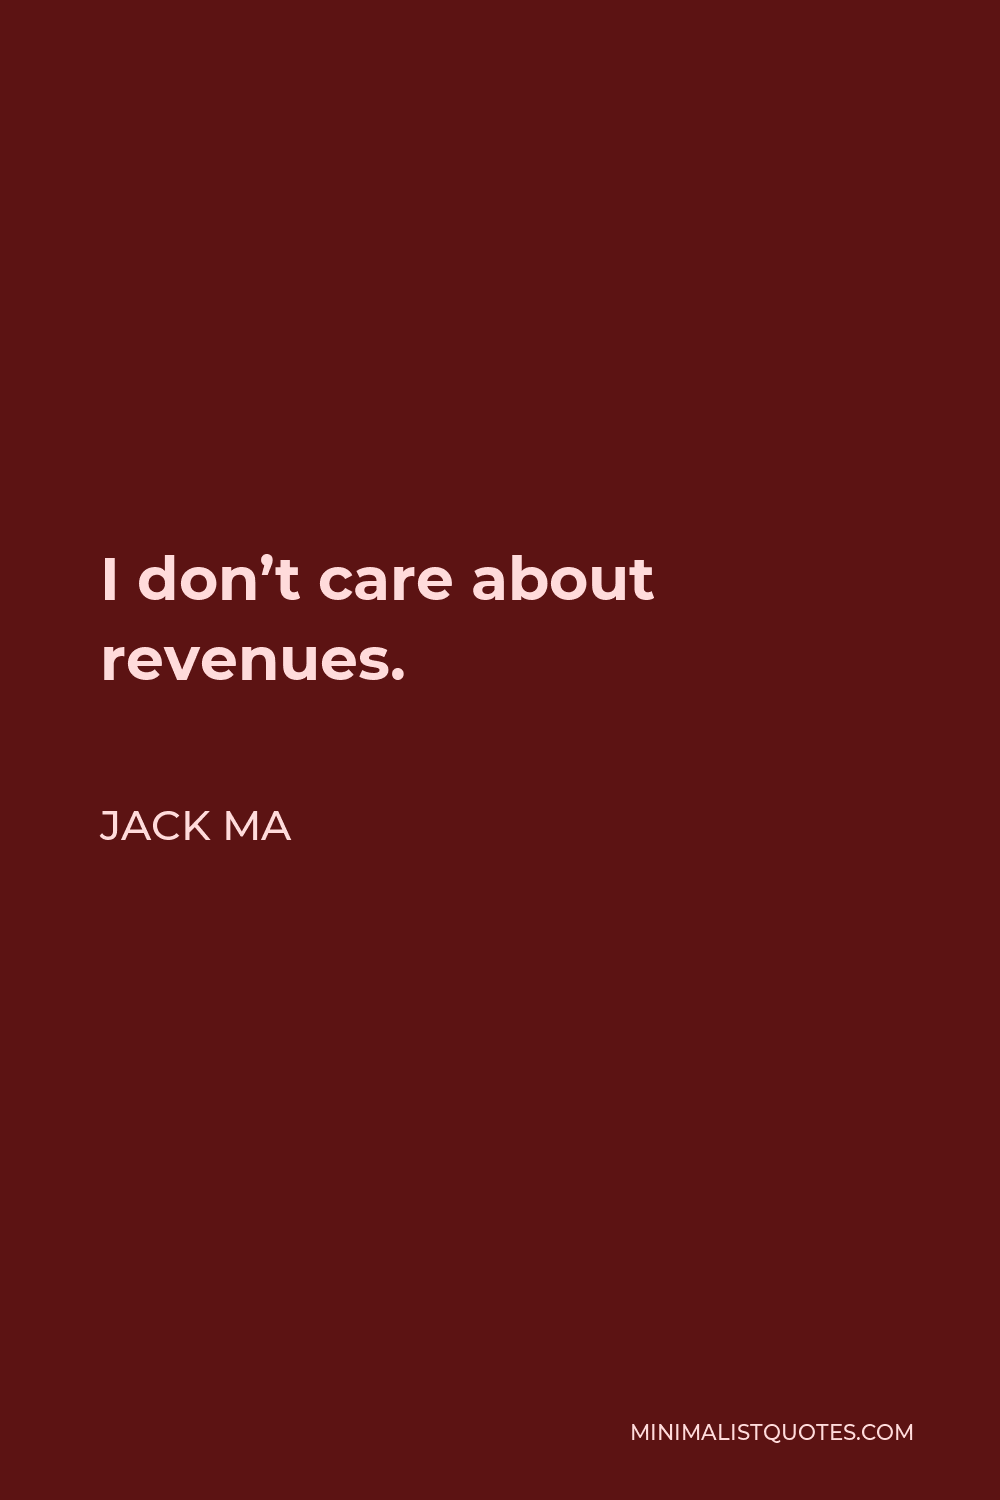 Jack Ma Quote - I don’t care about revenues.